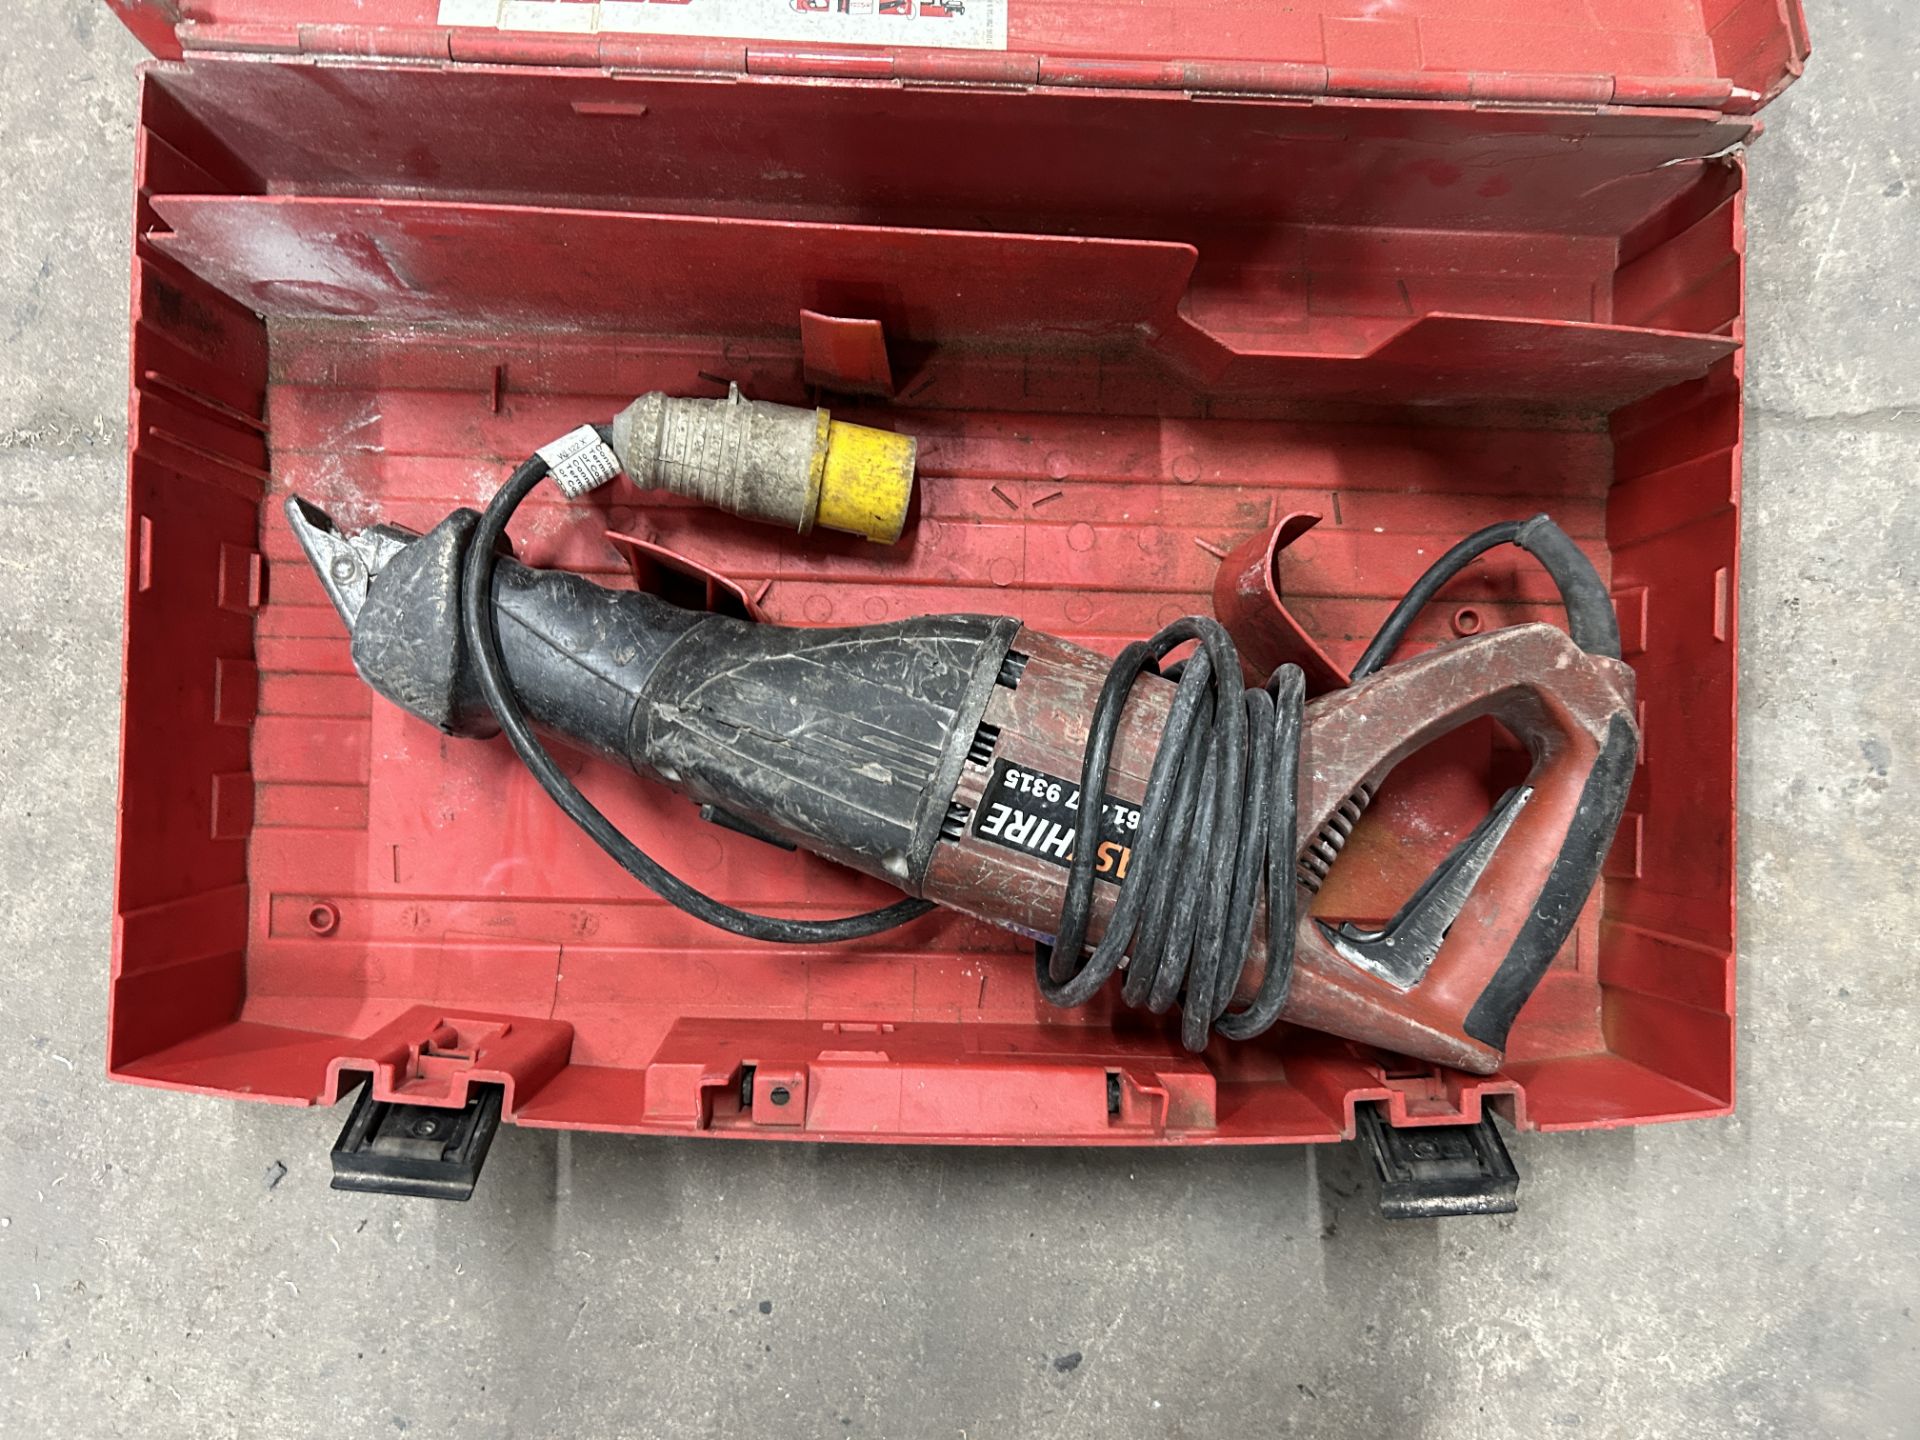 Hilti Corded Reciprocating Saw in Case - Image 2 of 3